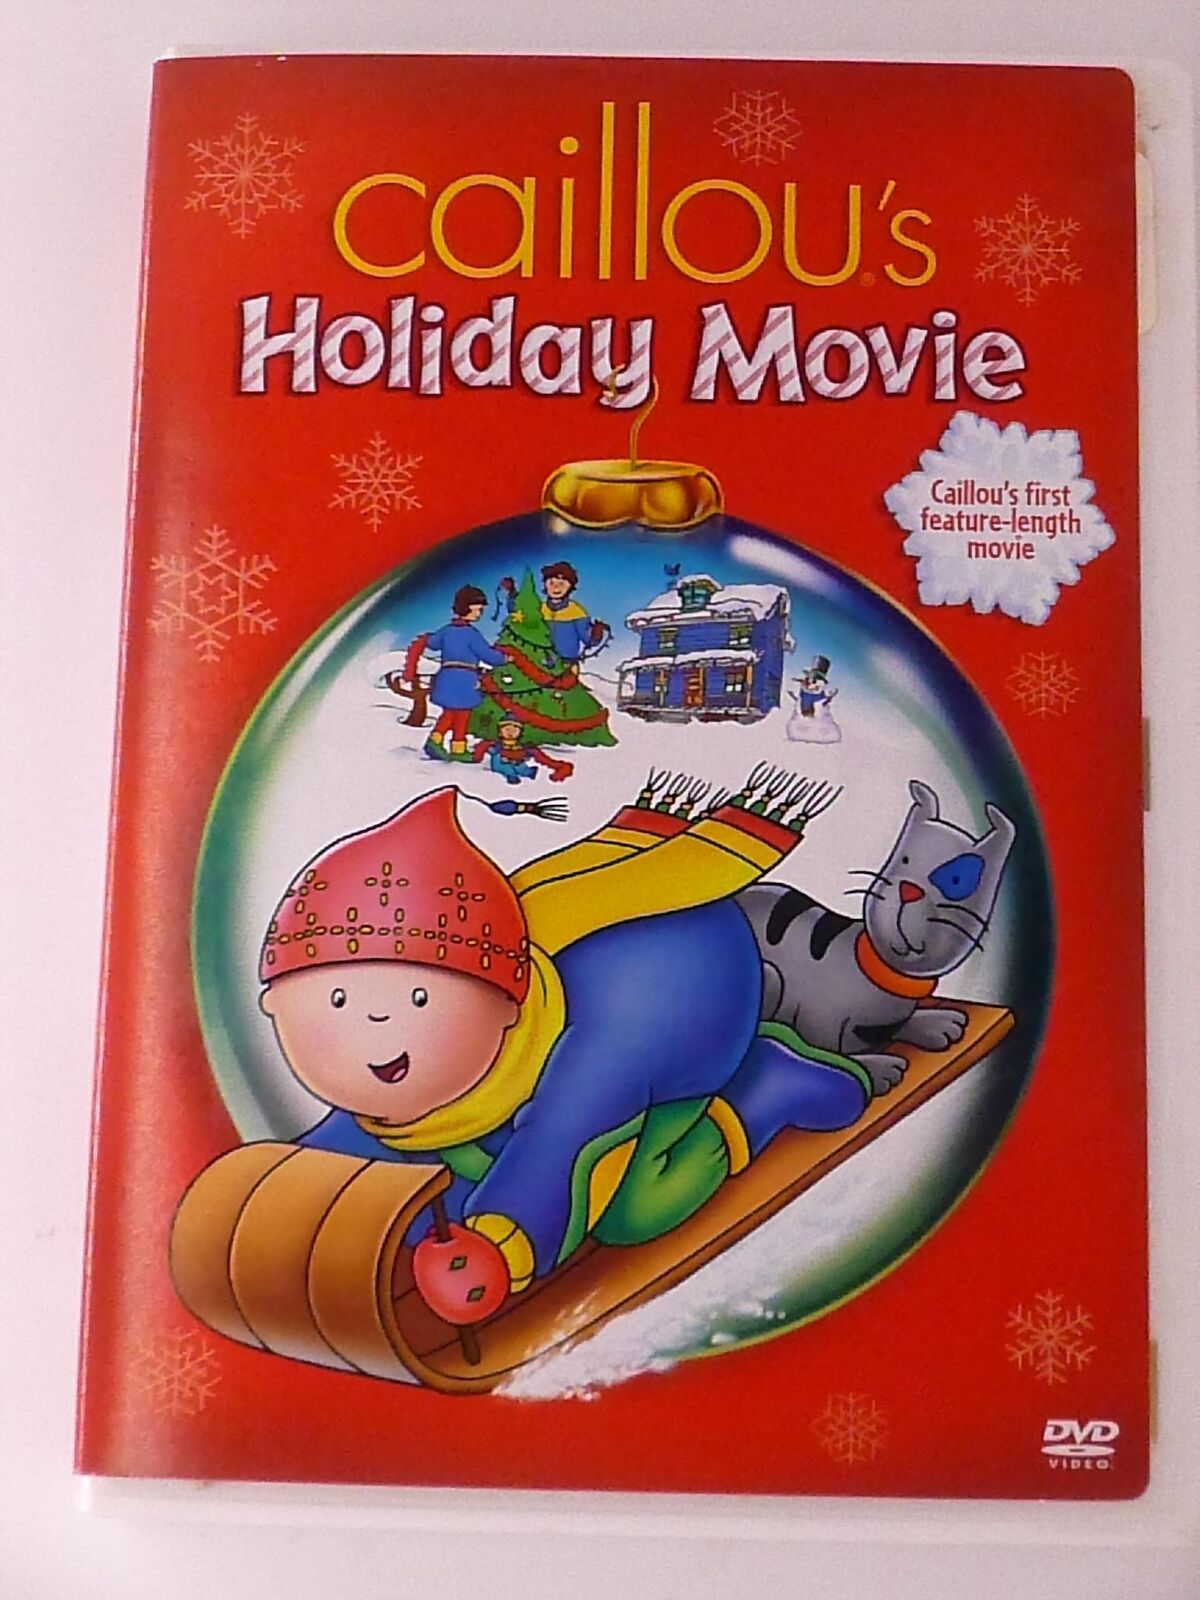 Caillous Holiday Movie (DVD, 2003) - J0917